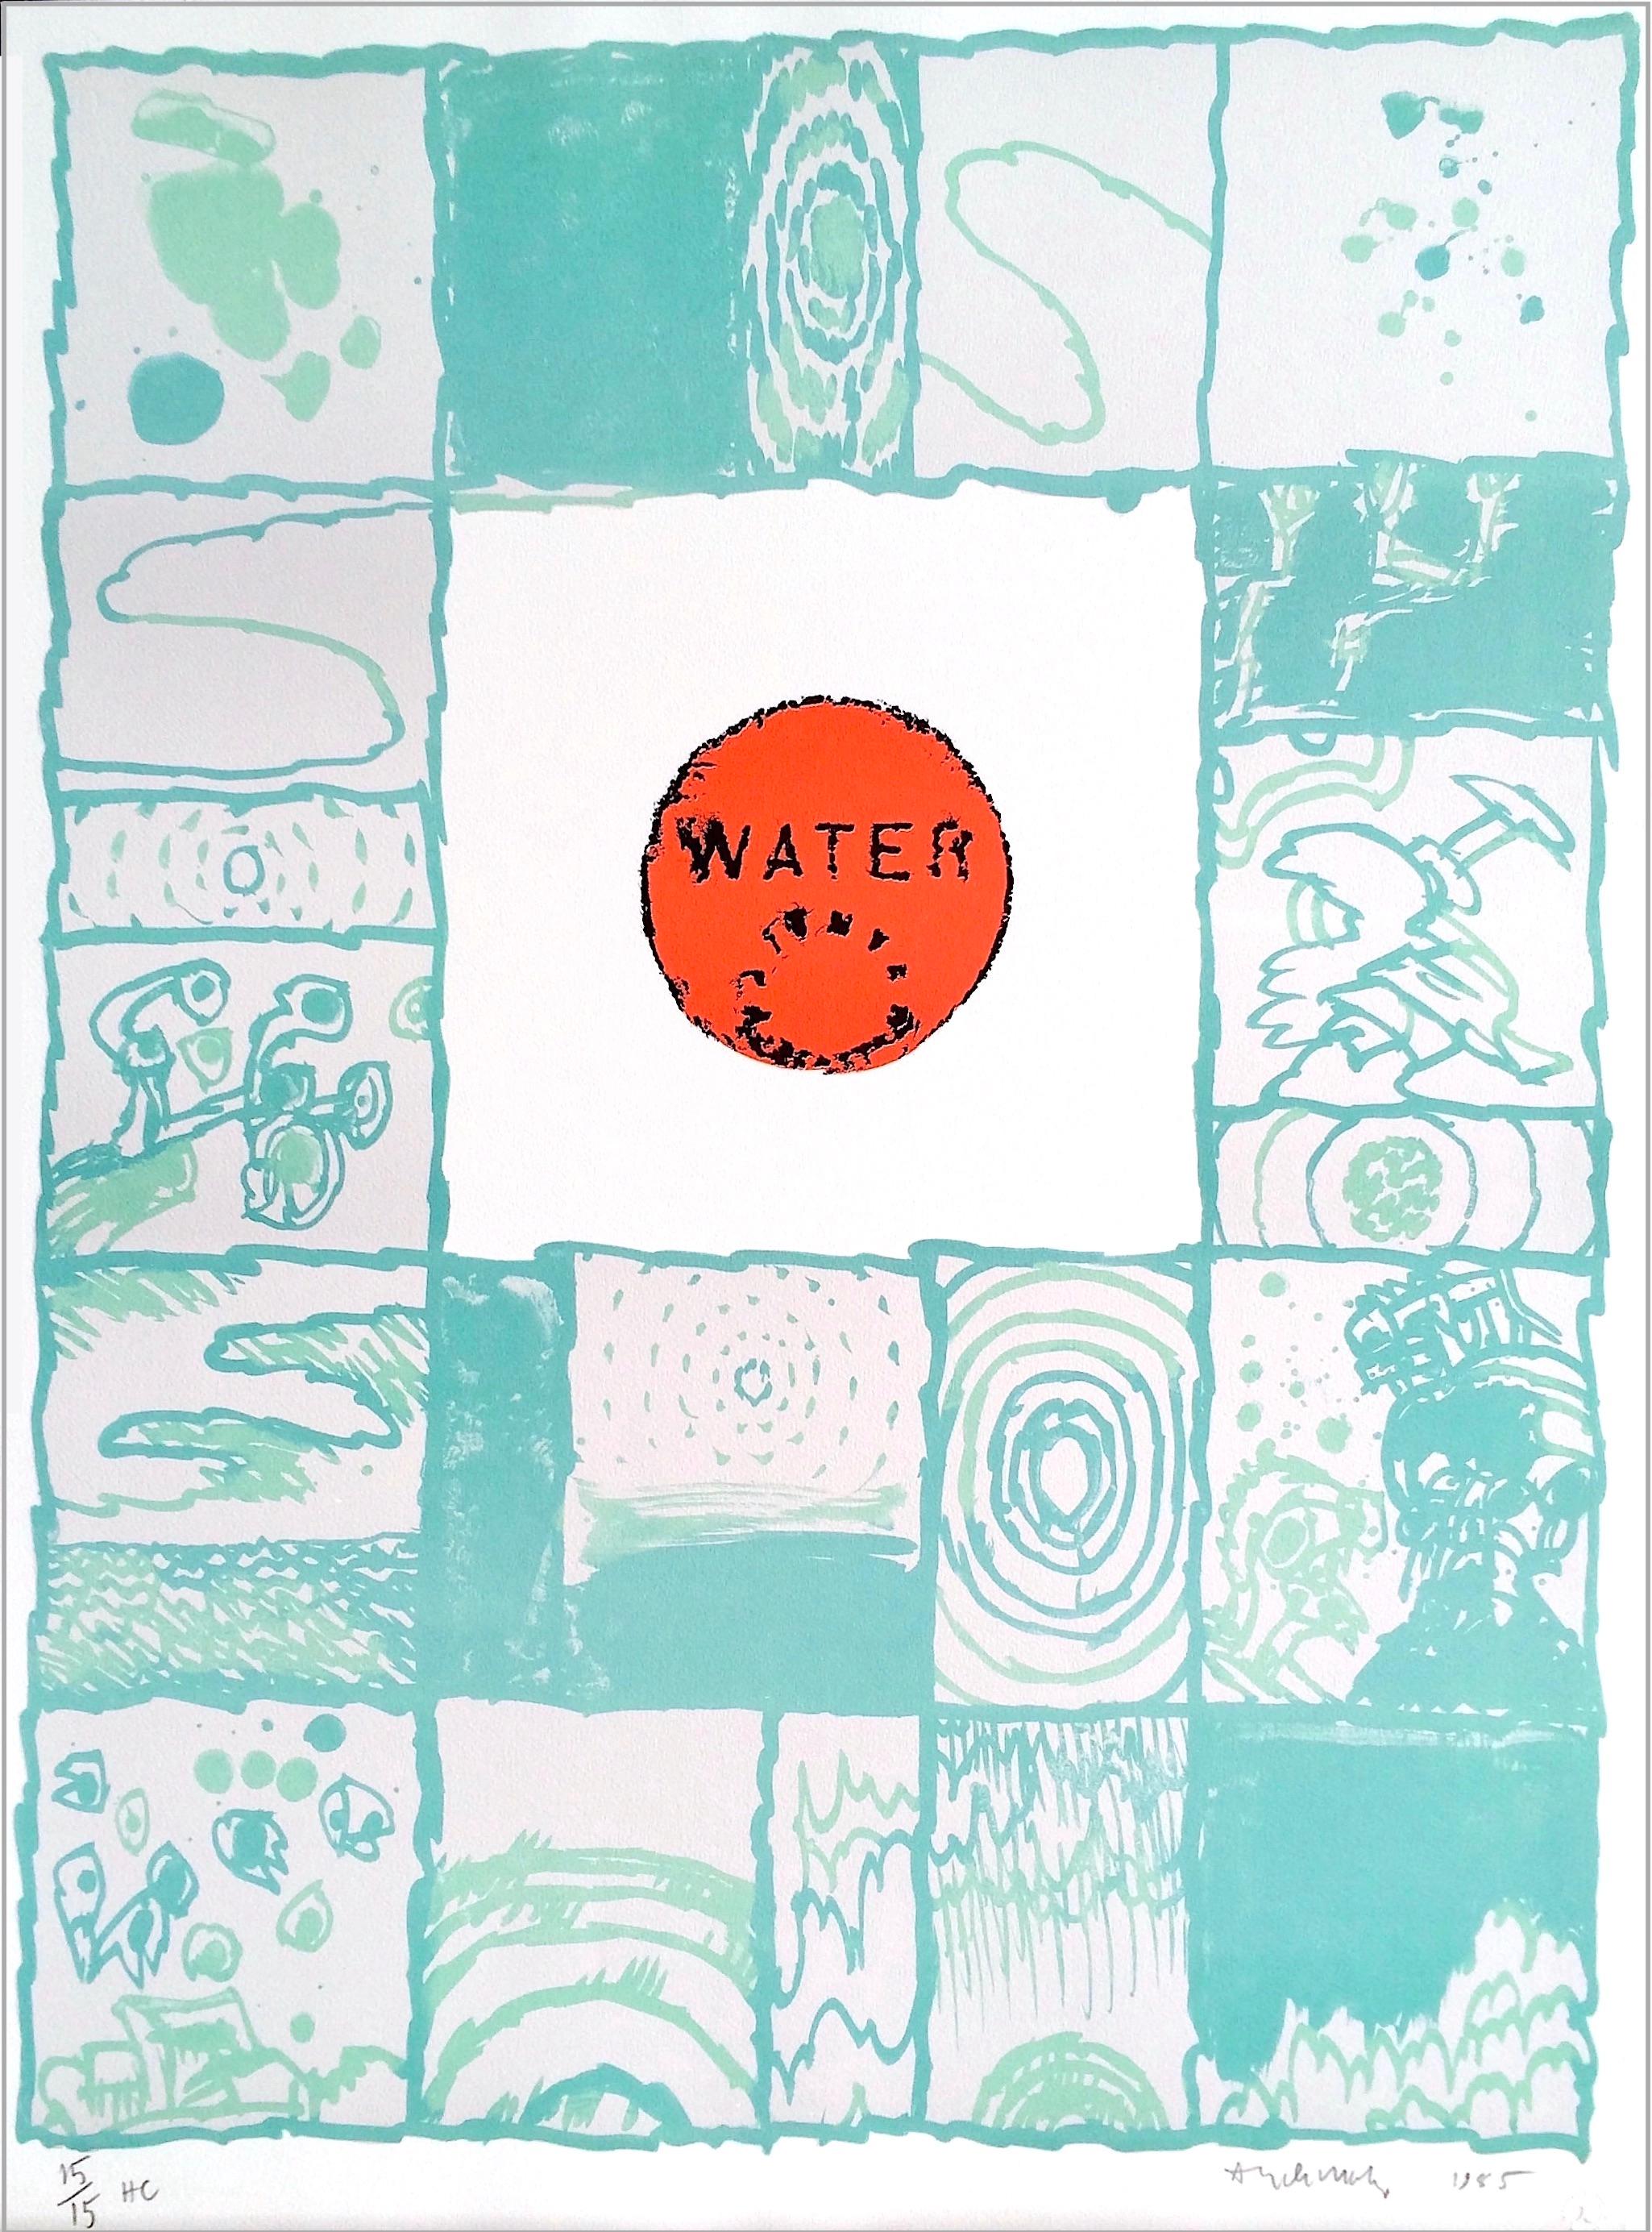 Pierre Alechinsky Abstract Print - WATER Signed Lithograph, Abstract Chinese Brush Strokes, Manhole Cover, Aqua